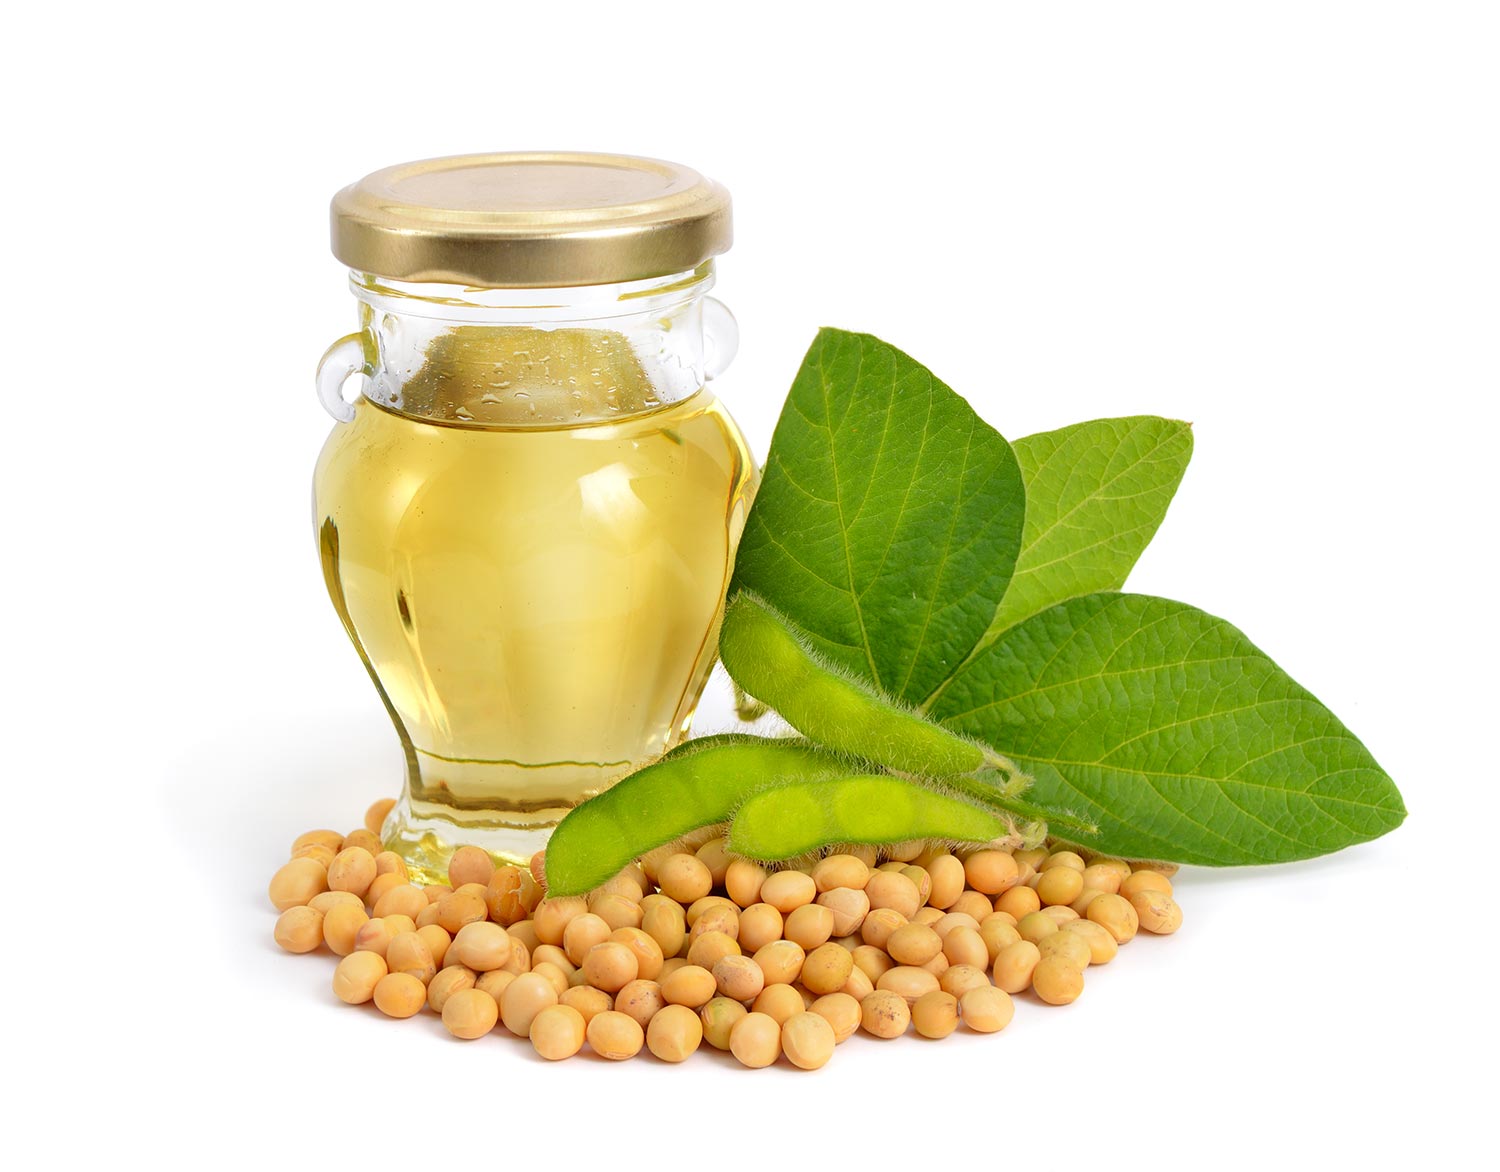 Soybean oil in a bottle with green pods and leawes